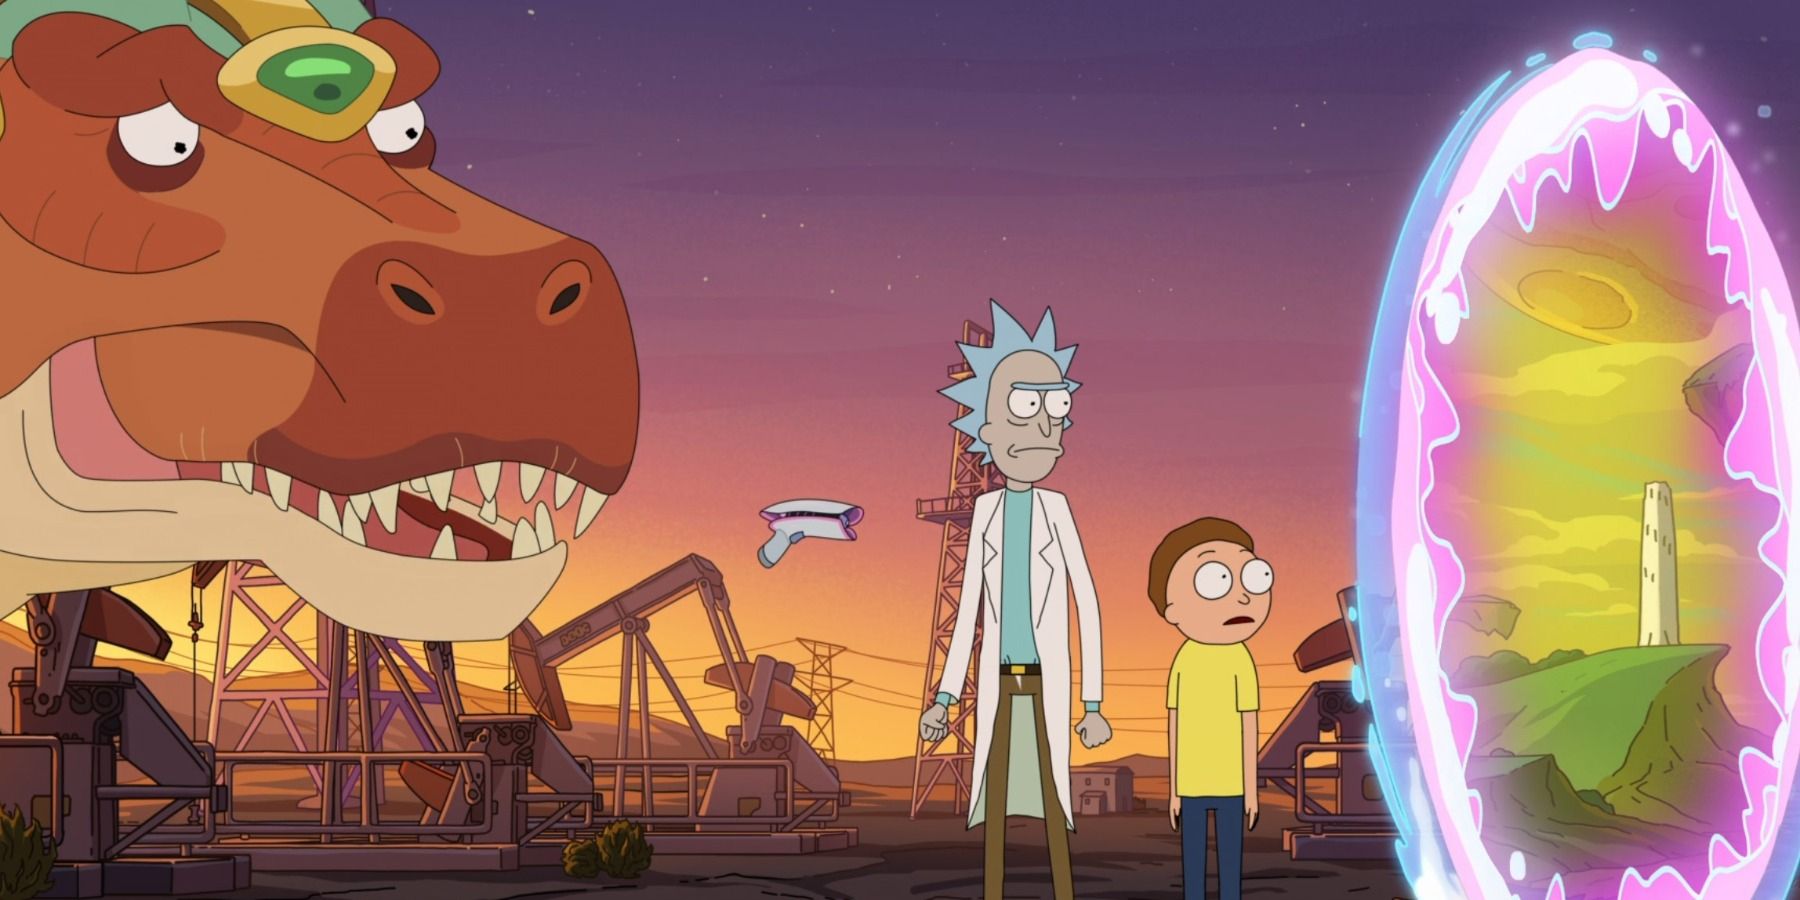 RICK AND MORTY Season 7 Episode 6 Review: A Classic Adventure With